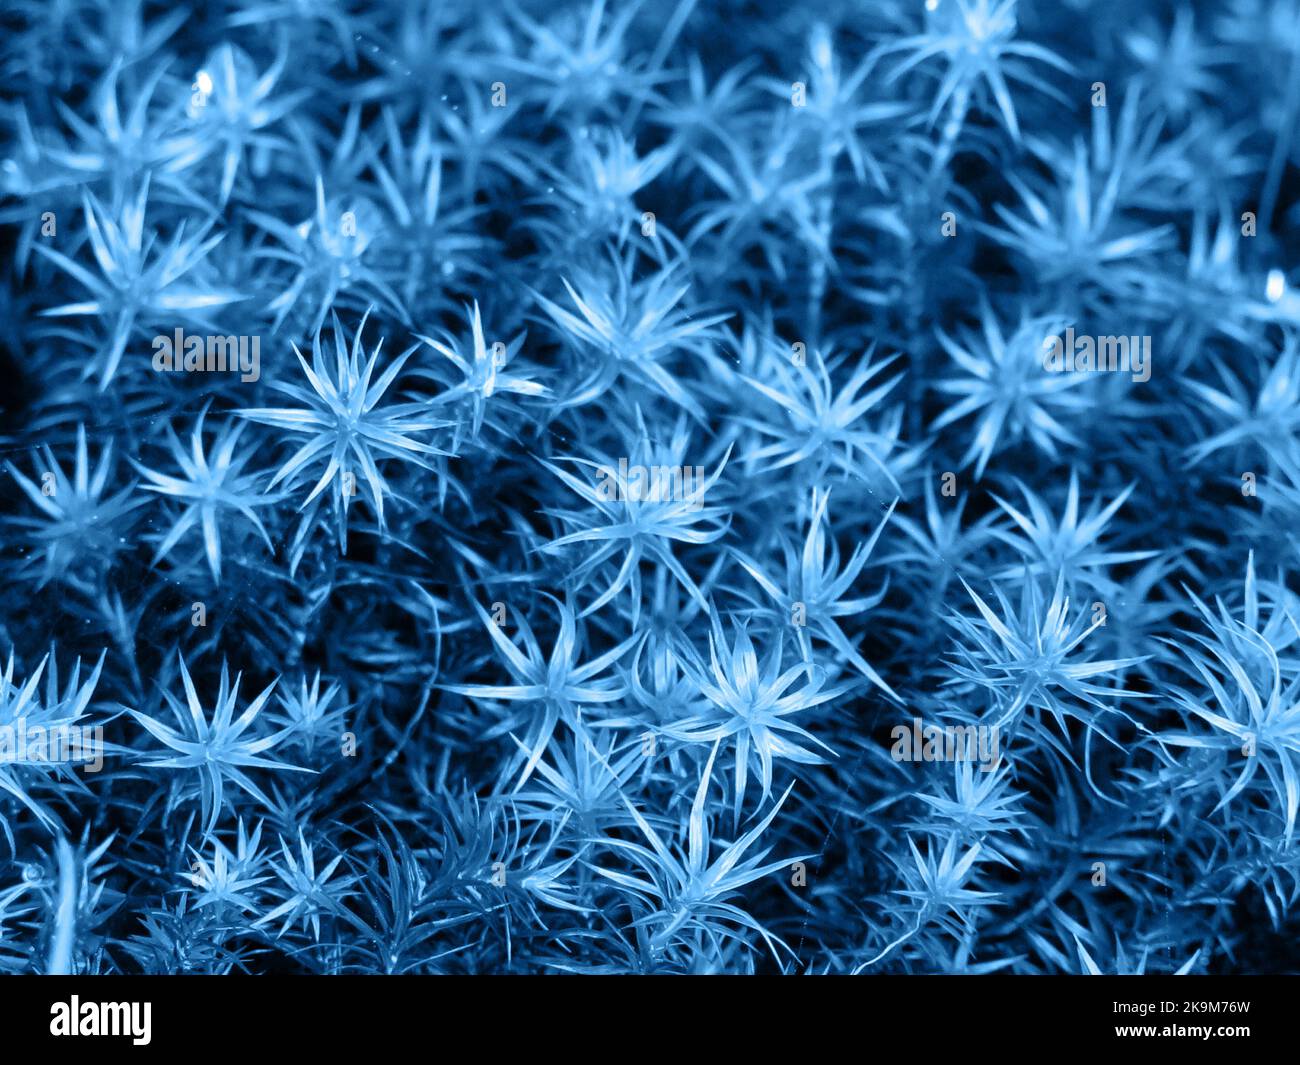 Bog haircap moss or an evergreen grass in blue color. Polytrichum strictum. Nature background pattern closeup Stock Photo